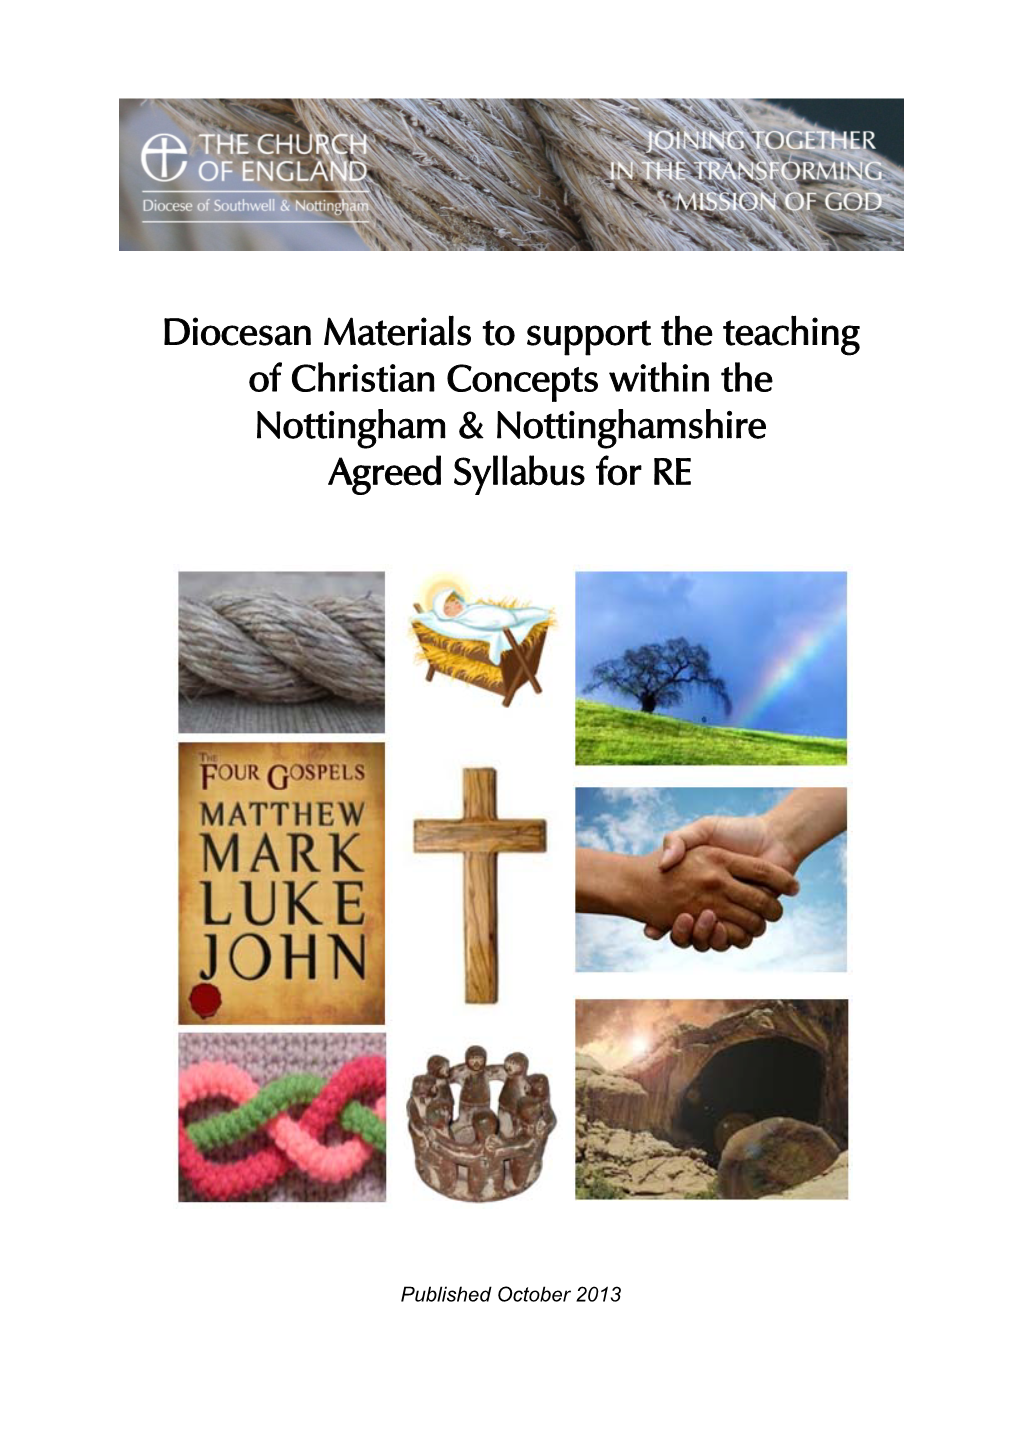 Diocesan Materials to Support the Teaching of Christian Concepts Within the Nottingham & Nottinghamshire Agreed Syllabus for RE